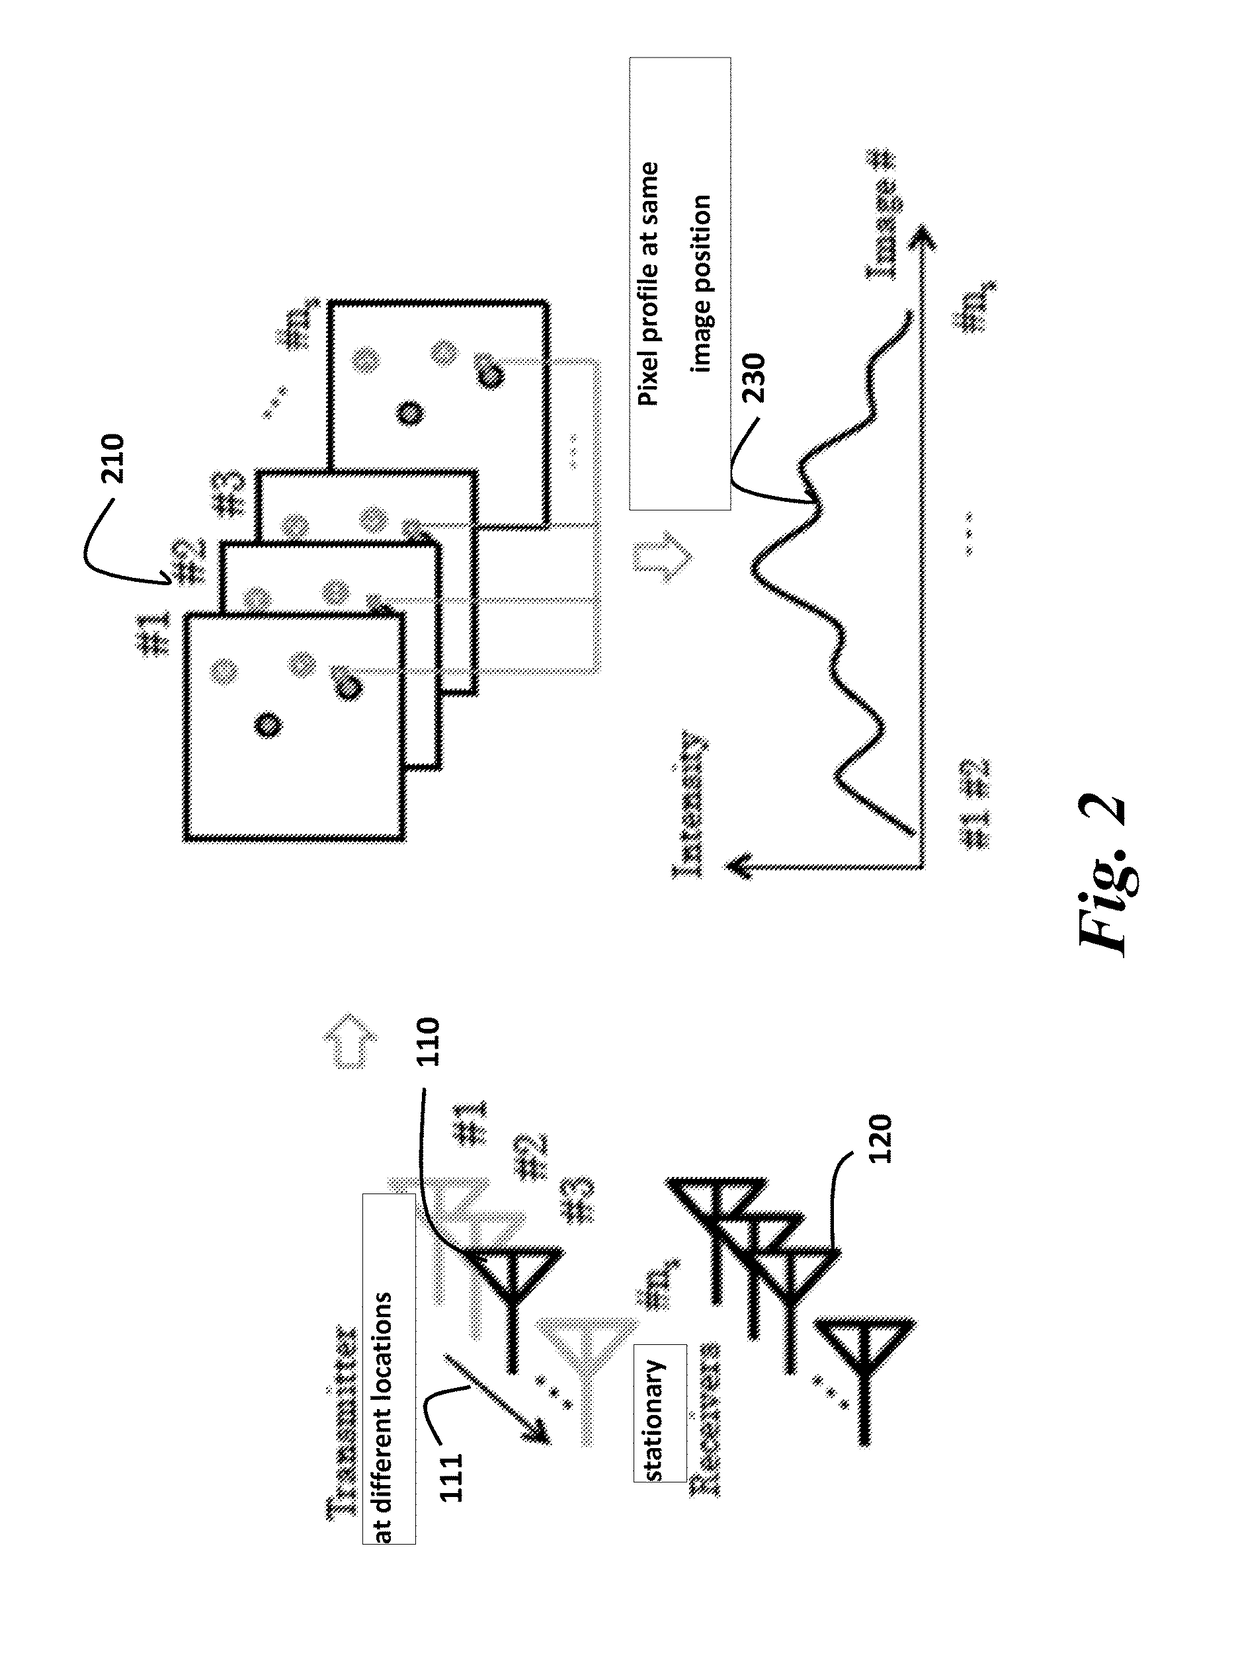 System and method for through-the-wall-radar-imaging using total-variation denoising